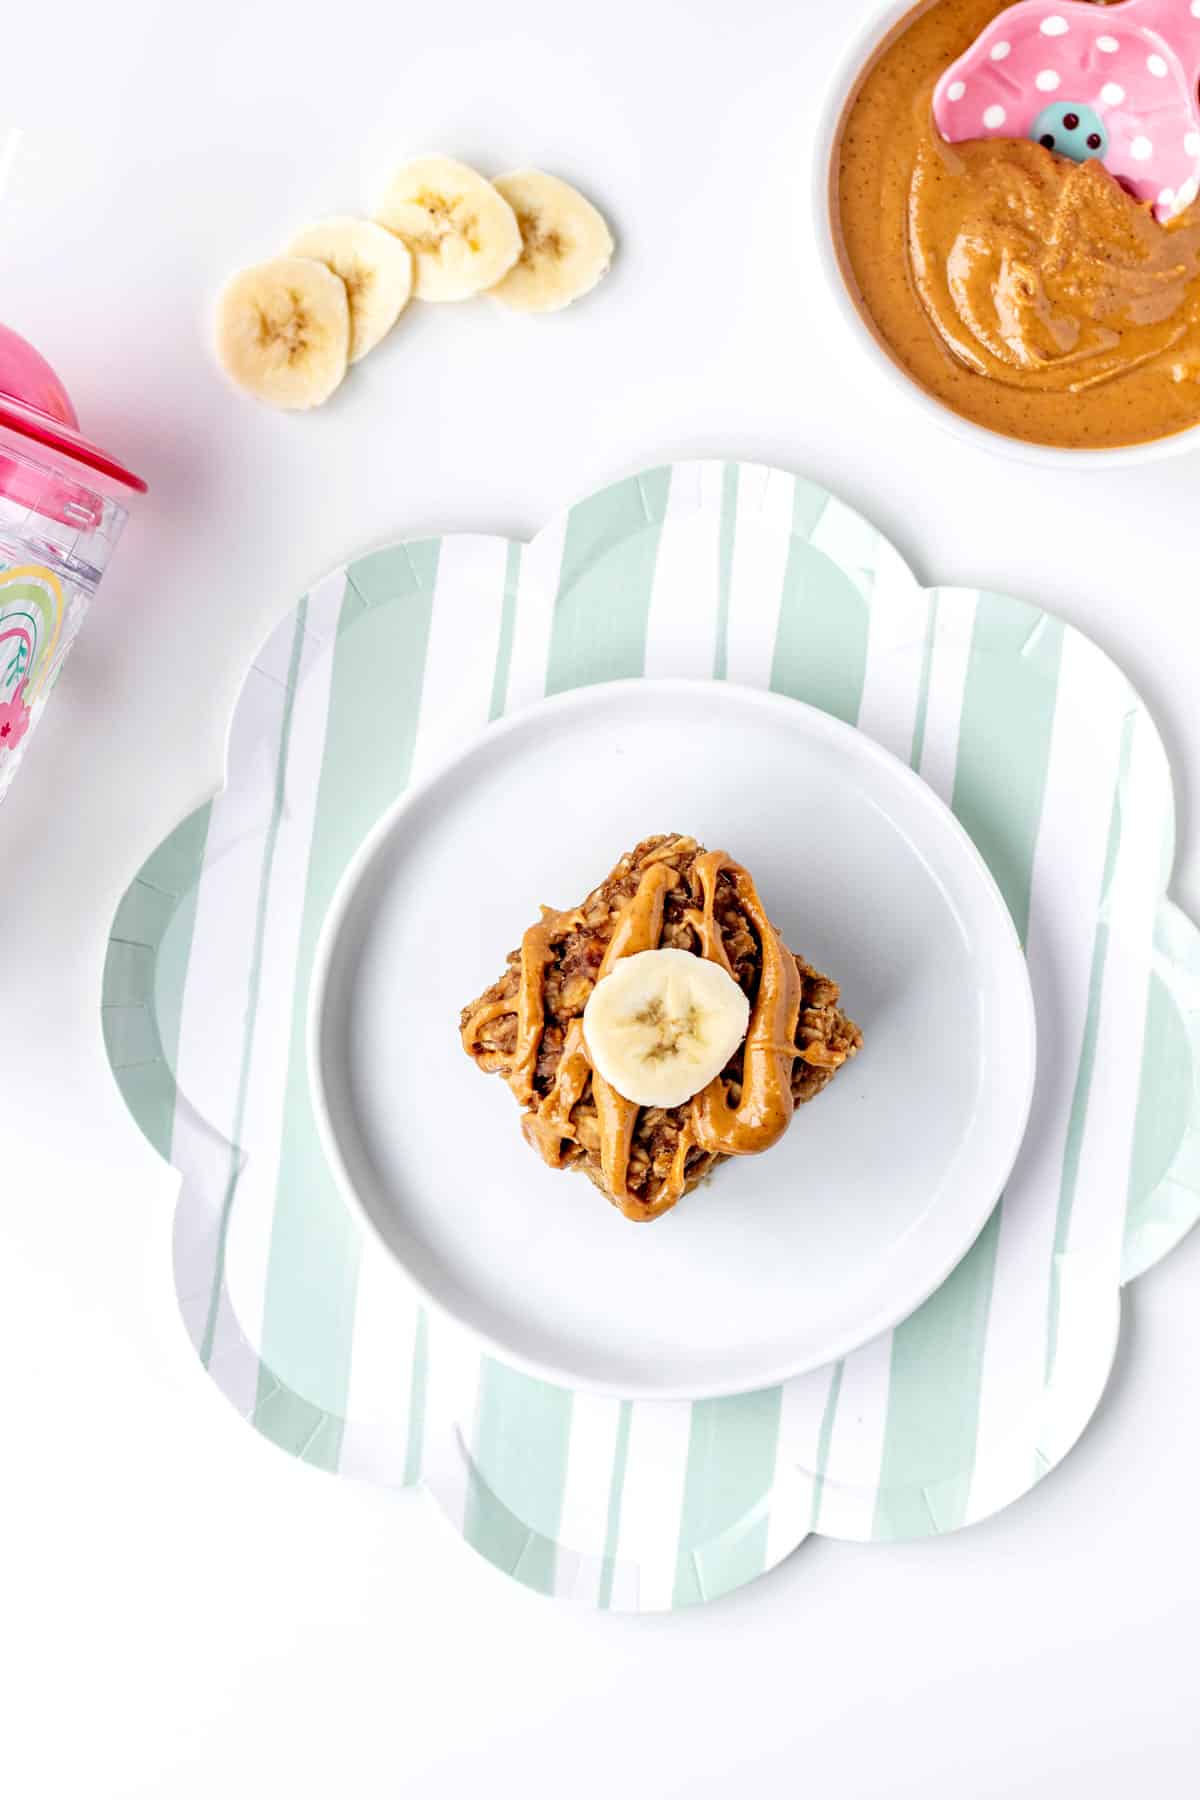 A peanut butter banana oatmeal bar on a plate with banana slices and peanut butter.